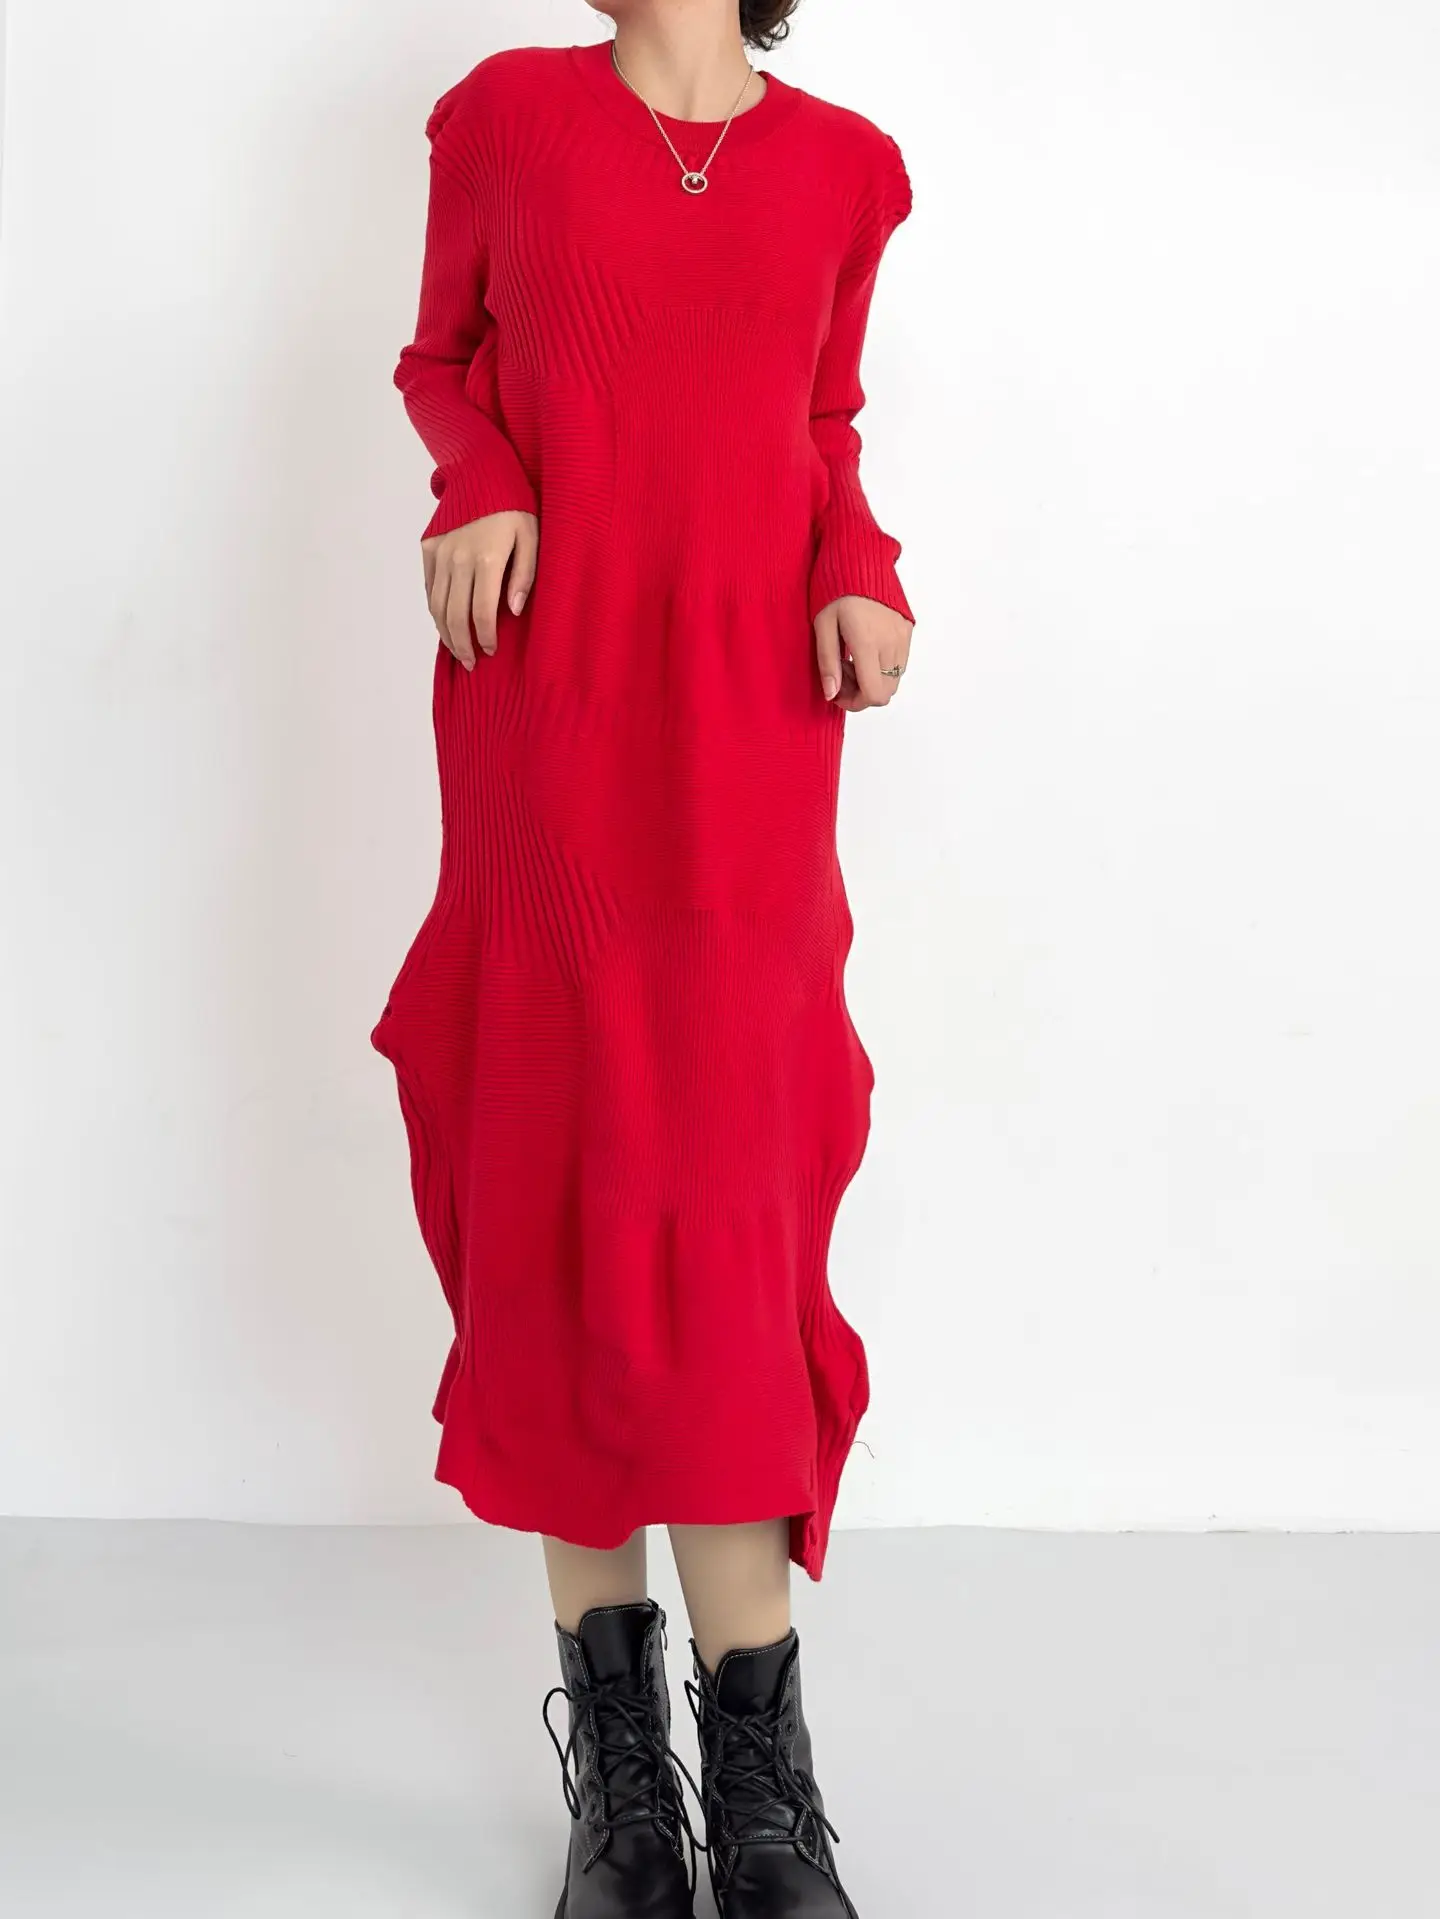 Pleated Knit Fold Dress miteigi Homme Plissé Issey Miyake Women’s ribbed Knitted Fold Irregular long sleeves crewneck frills Original Designer Below knee frilled round o-neck dresses for woman in red  Spring Summer New Year's Party Womens crew neck KONE KONE Fashion Evening Wear